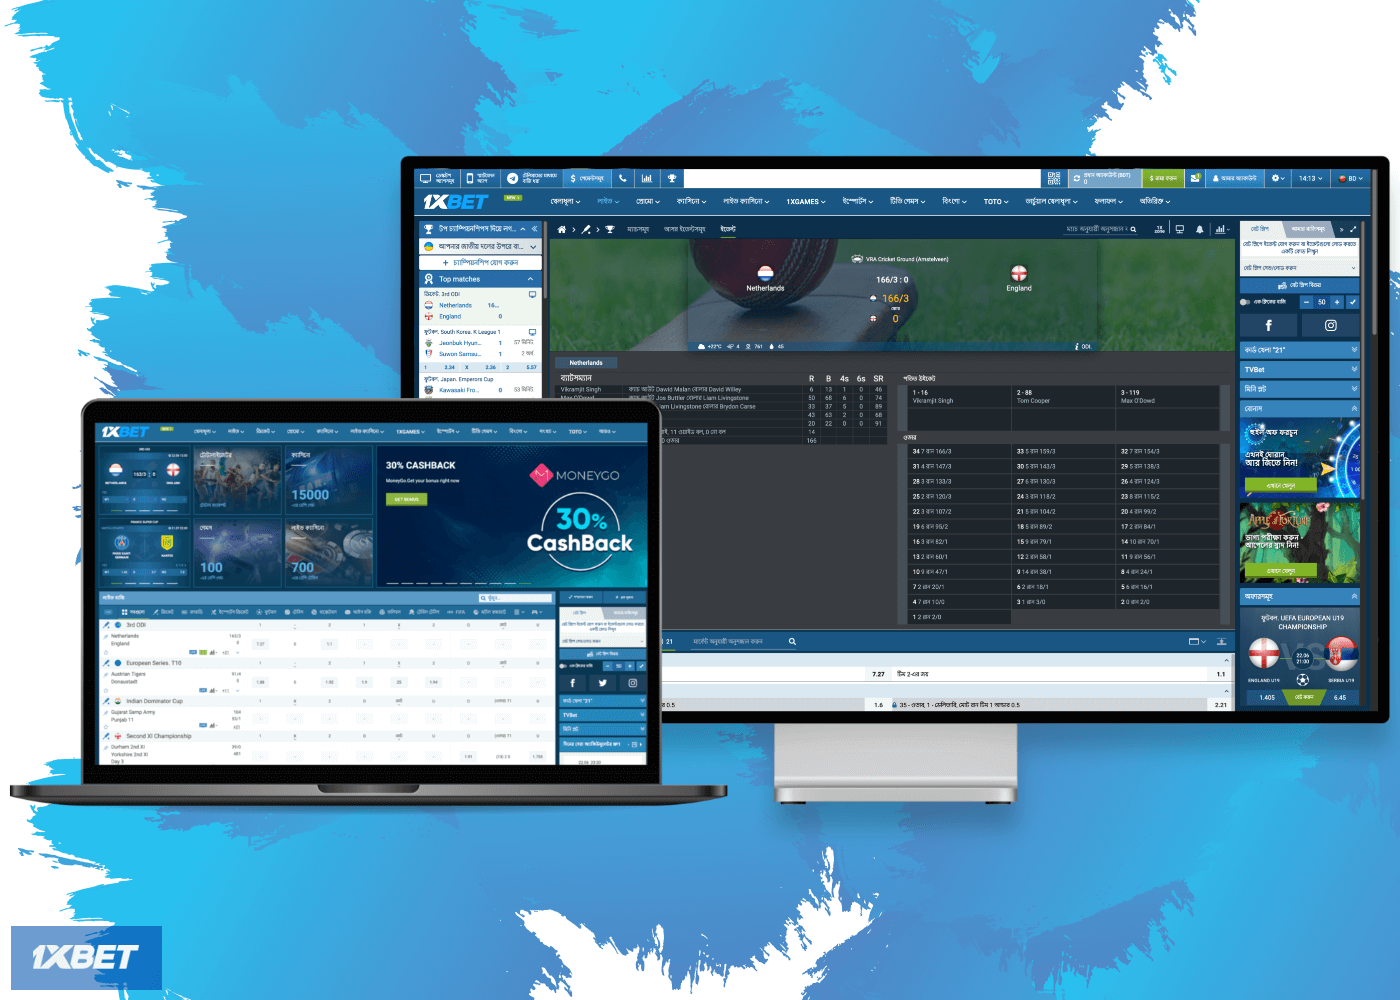 1xbet Sports Betting App for Windows